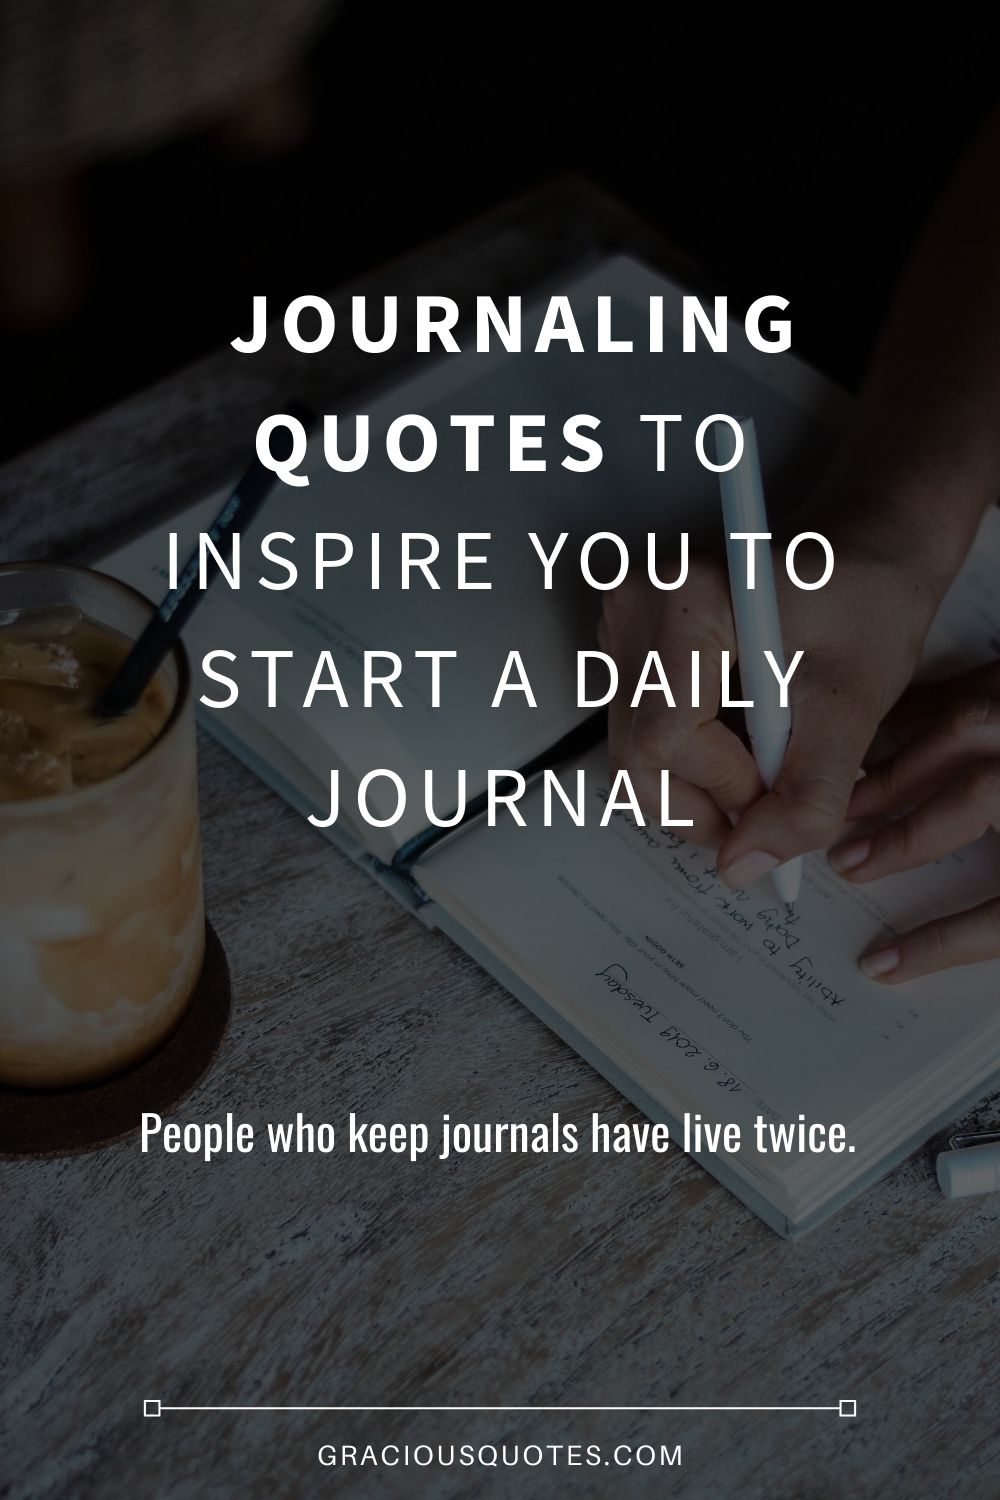 Journaling-Quotes-to-Inspire-You-to-Start-a-Daily-Journal-Gracious-Quotes